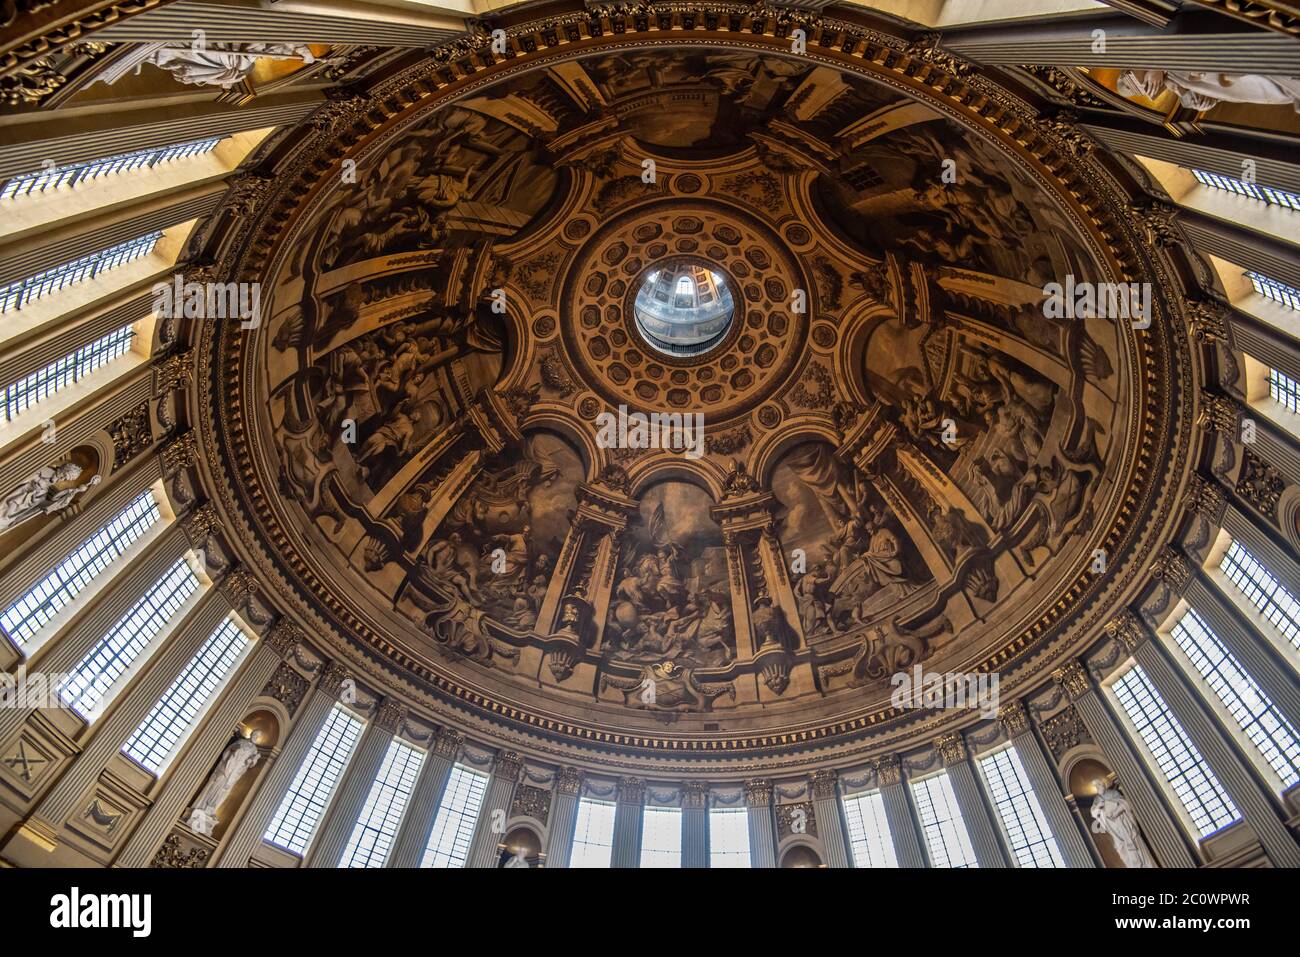 St Paul's Cathedral, London, England. Inside the cathedral taken from the Whispering Gallery. Stock Photo